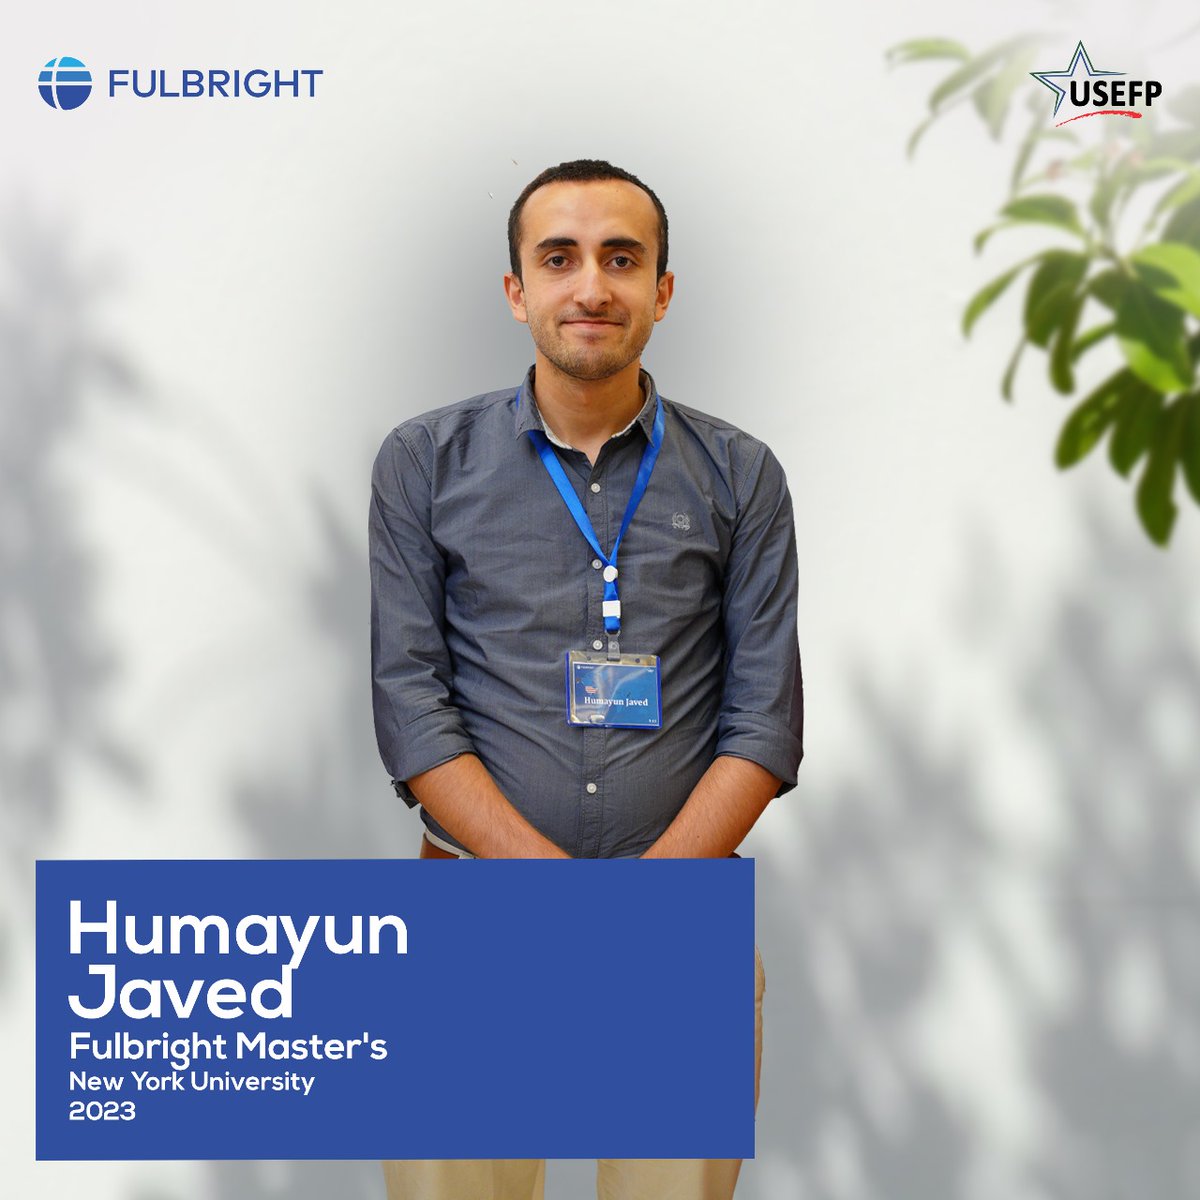 “My journey to the #Fulbright had different stops along the way. From seeking academic freedom in a learned environment to interacting with the world motivated me to apply for the scholarship,” shares Humayun Javed. He is pursuing an MA in IR studies from @nyuniversity. #USEFP